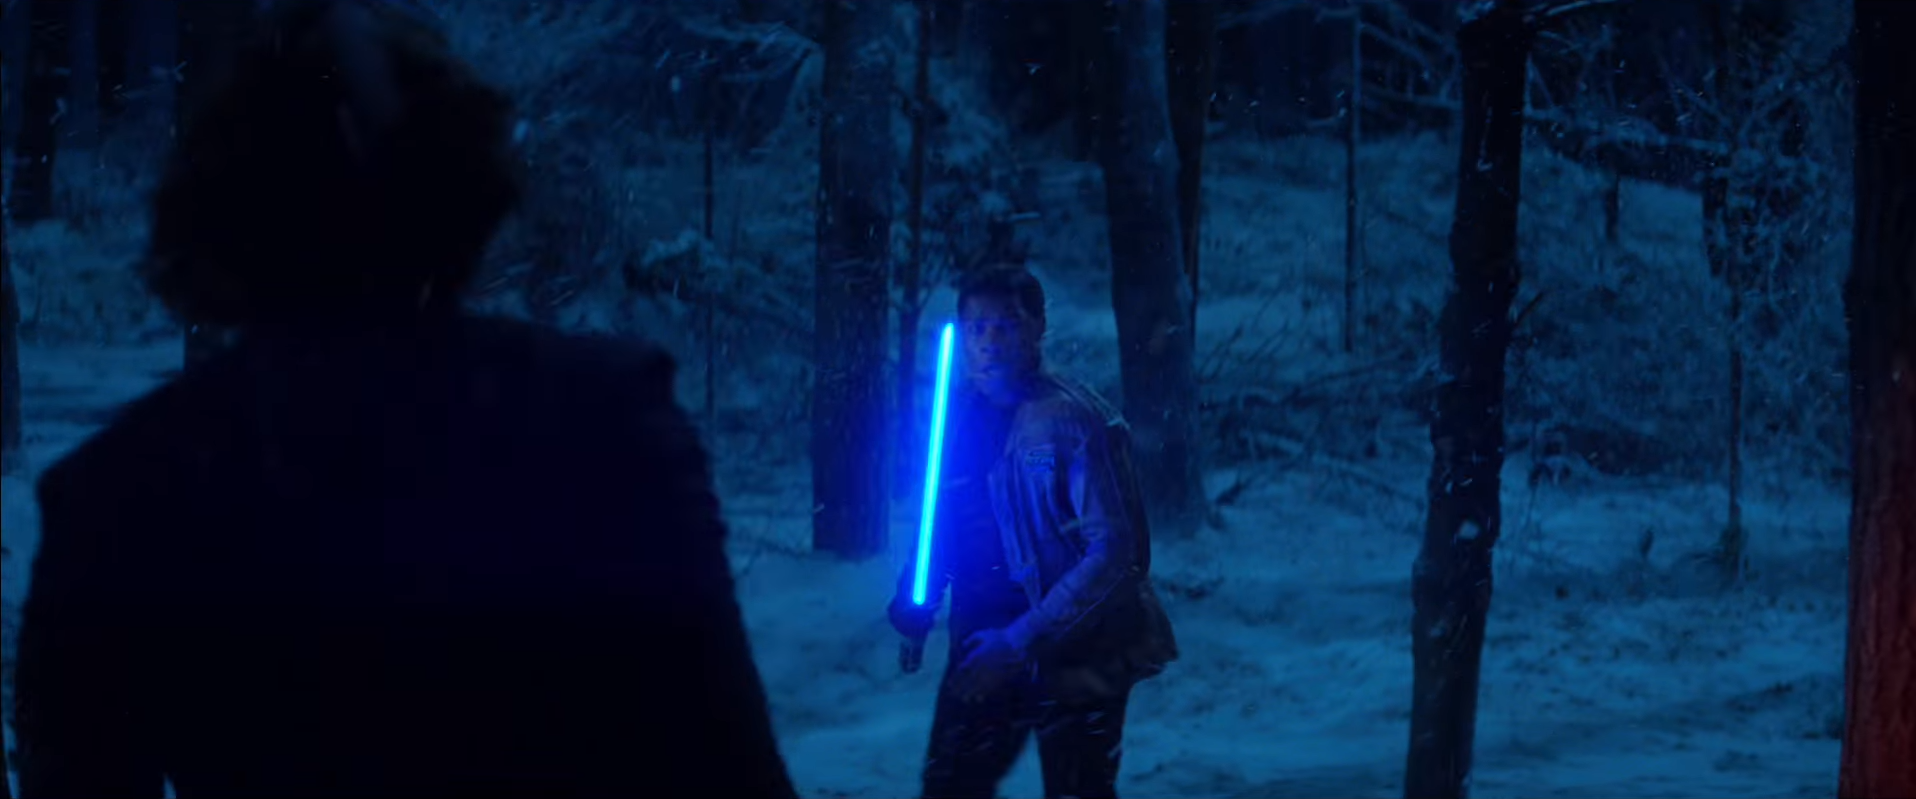 Kylo Ren and Finn in Star Wars The Force Awakens